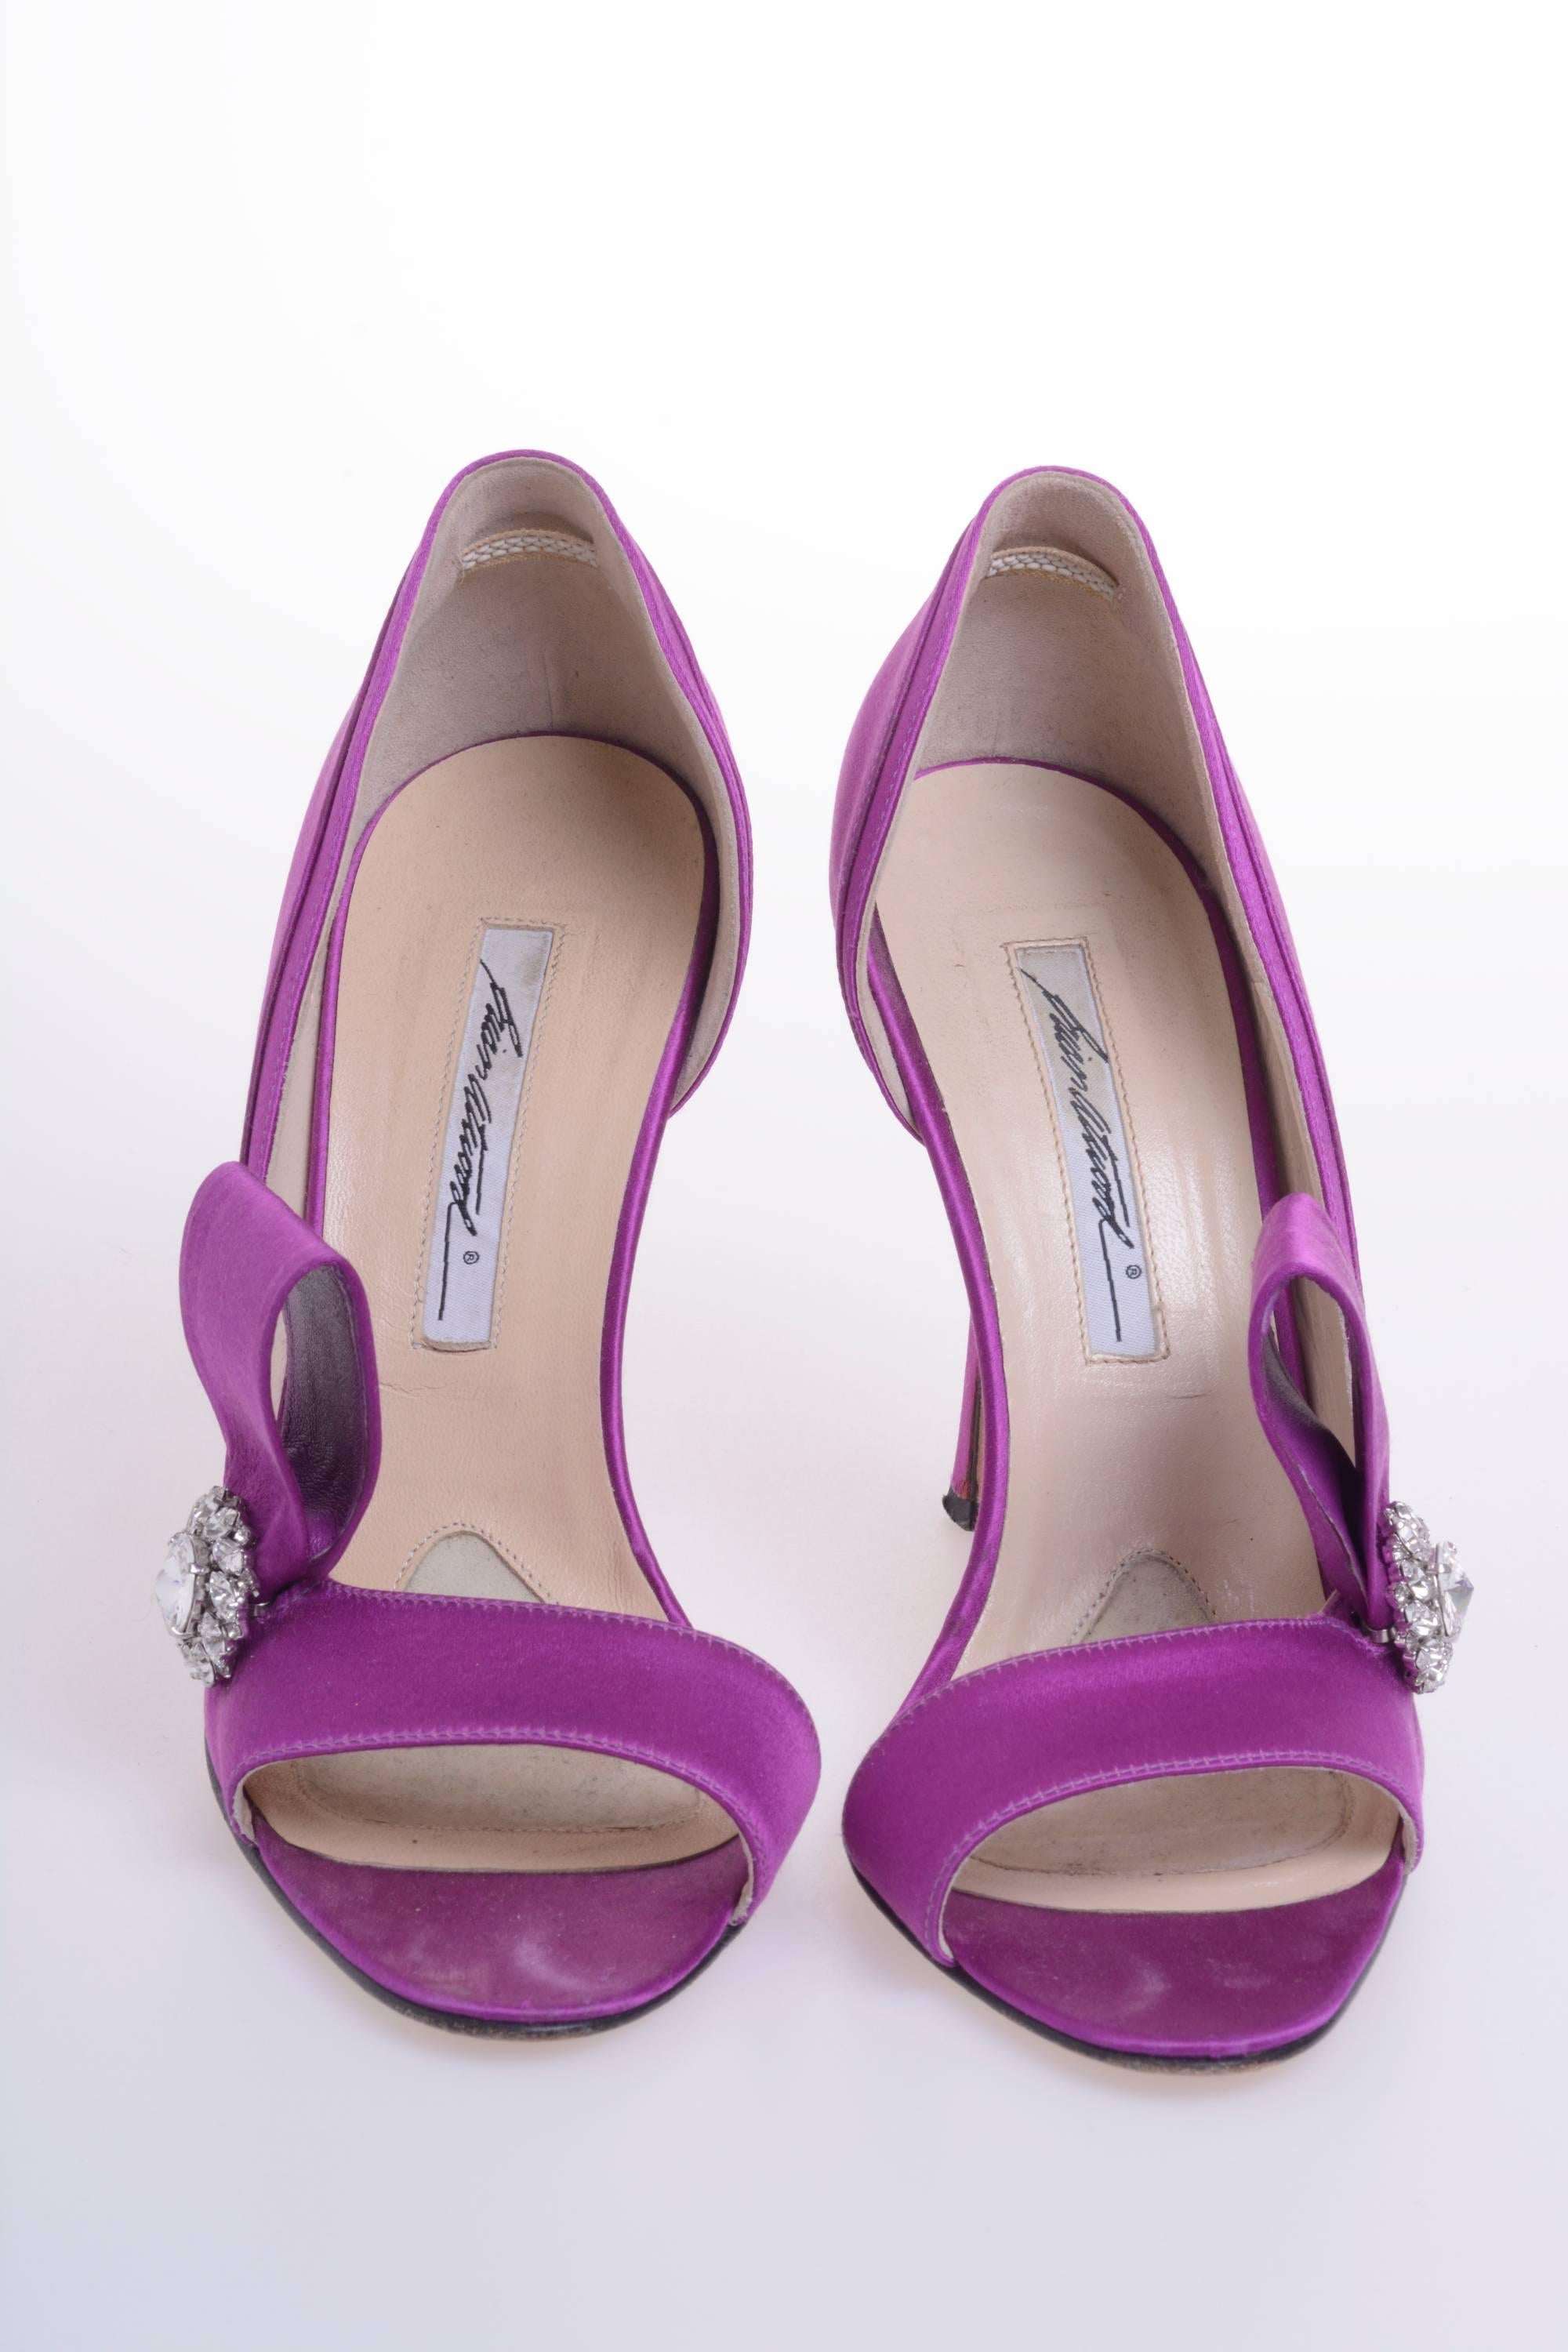 brian atwood shoes